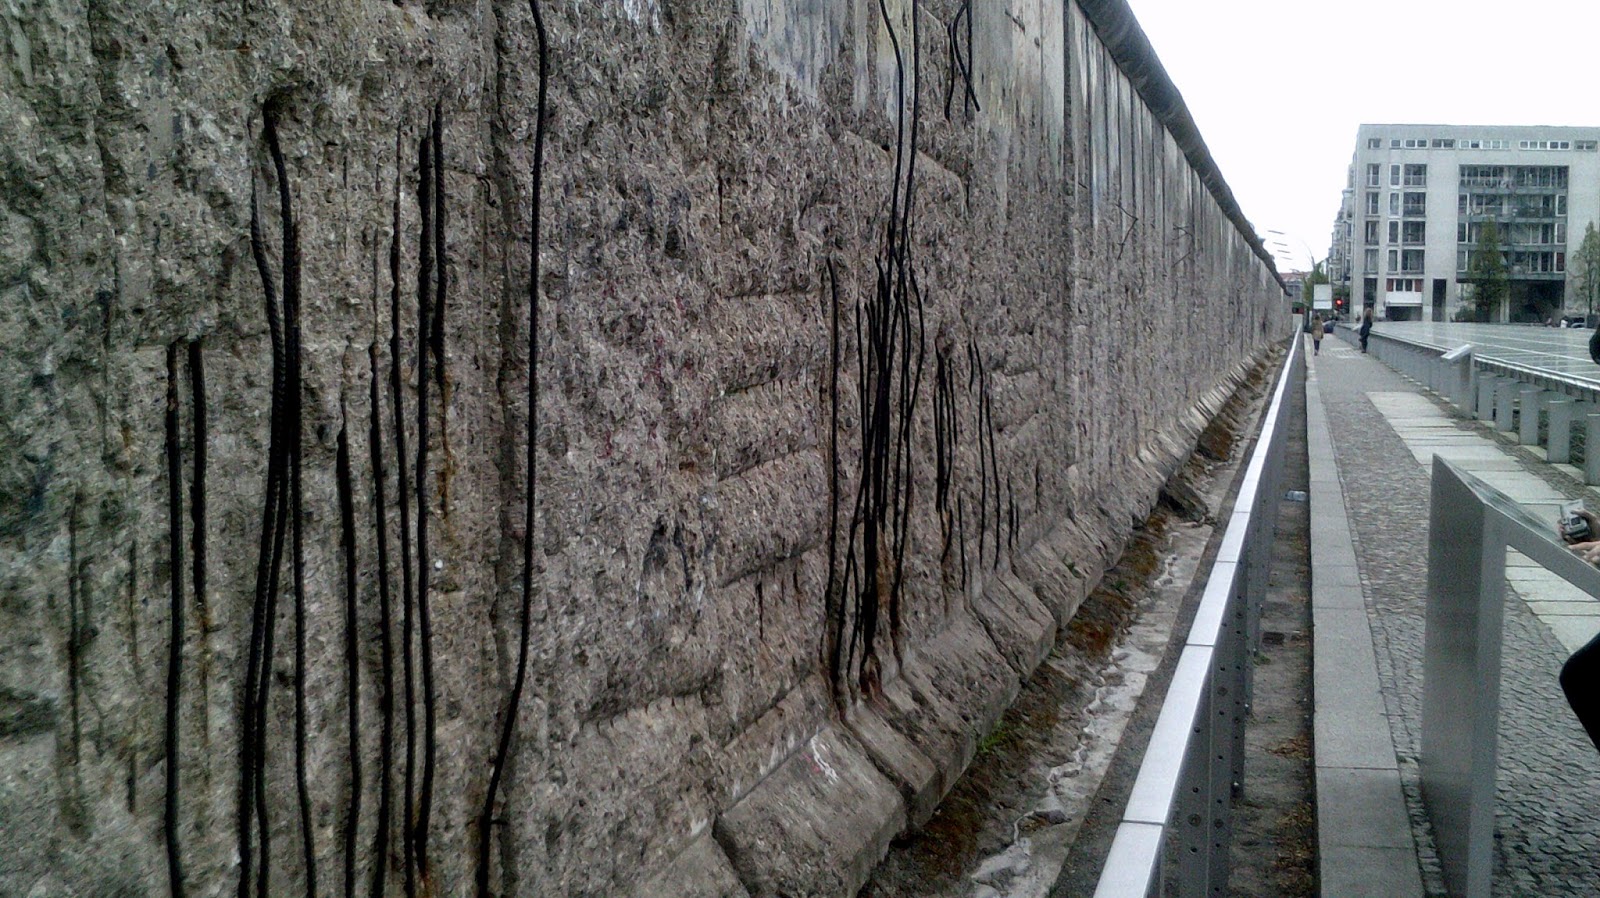 wigton physics: The Berlin Wall - crumbling concrete